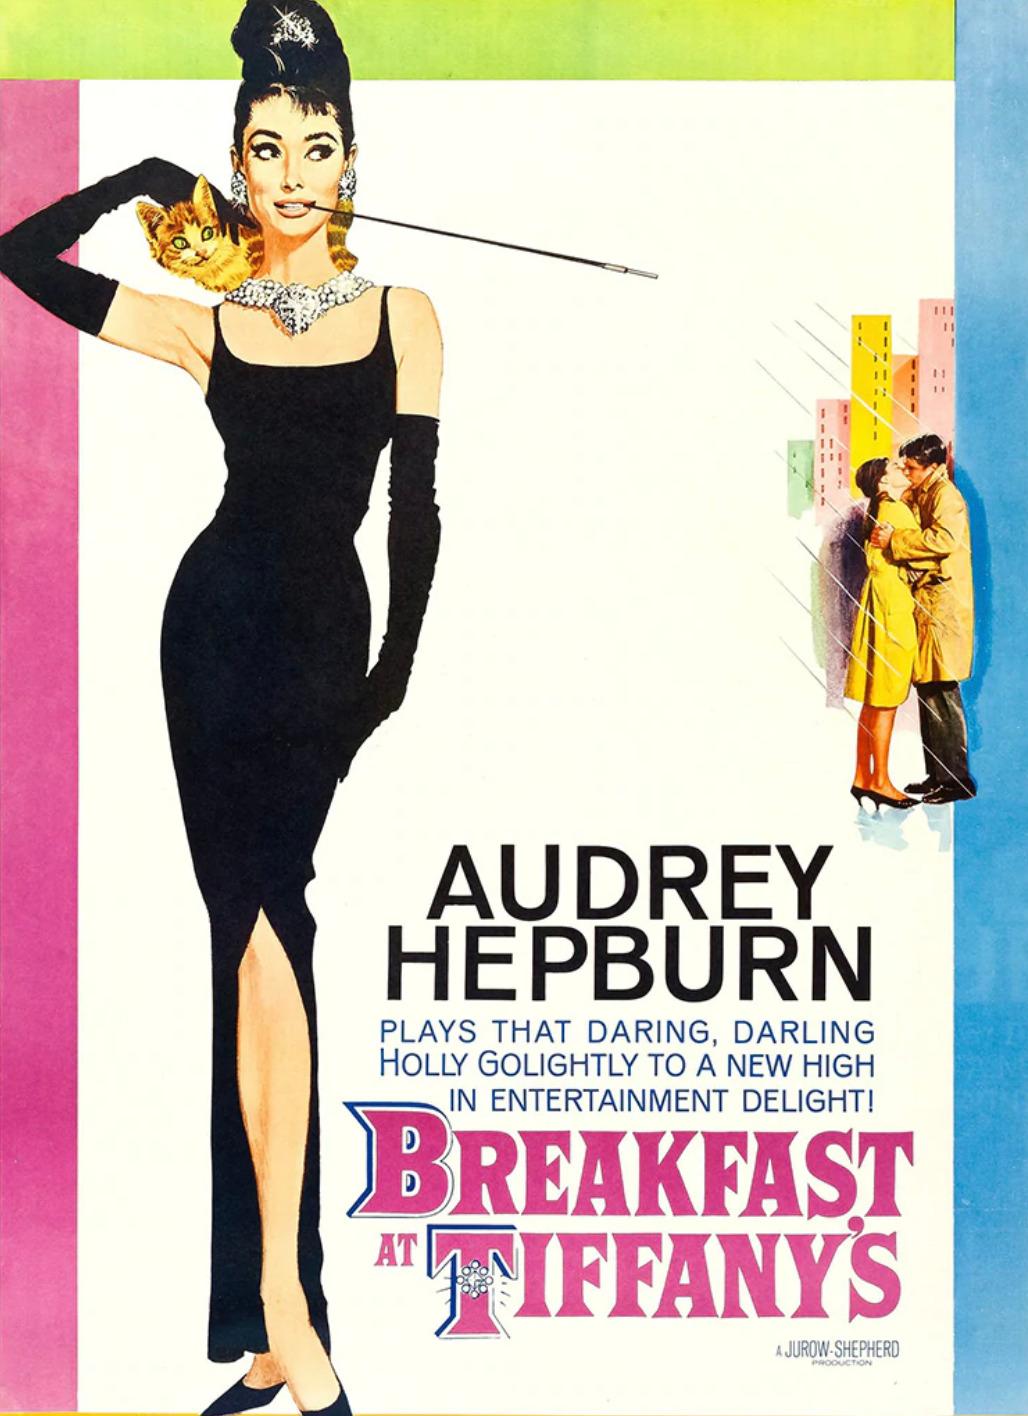 Breakfast At Tiffany’s (1961) original US 40 x 60. To my knowledge there are less than a handful of known copies in the world to have survived. Audrey Hepburn is the most collectable female star, and TIFFANY’S is her most asked about title. This